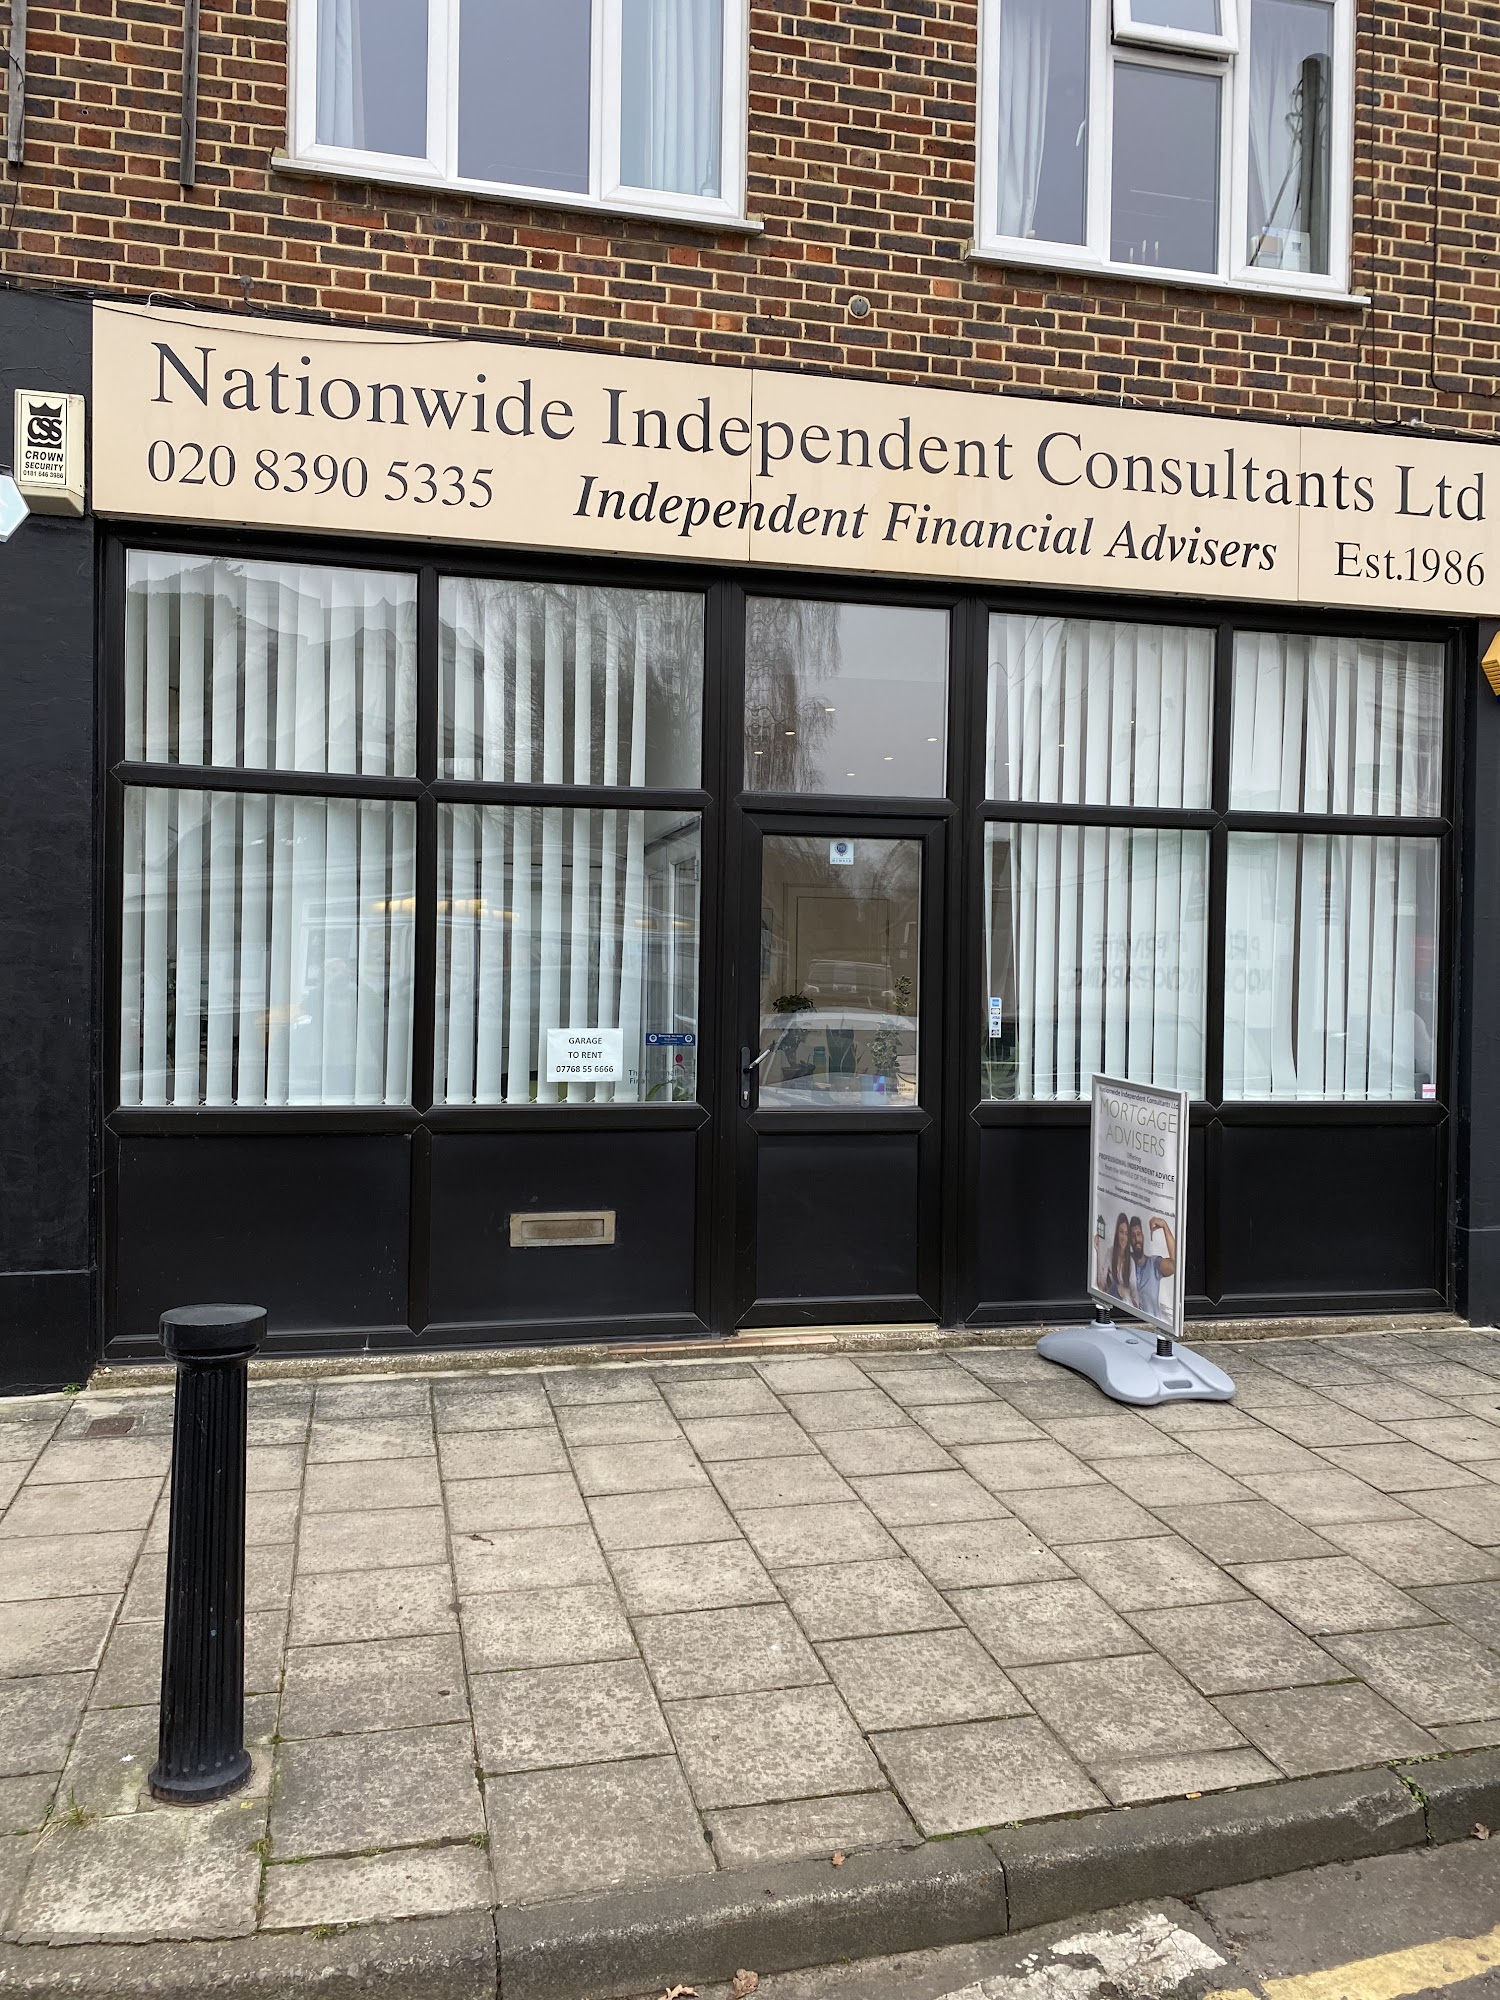 Nationwide Independent Consultants Ltd